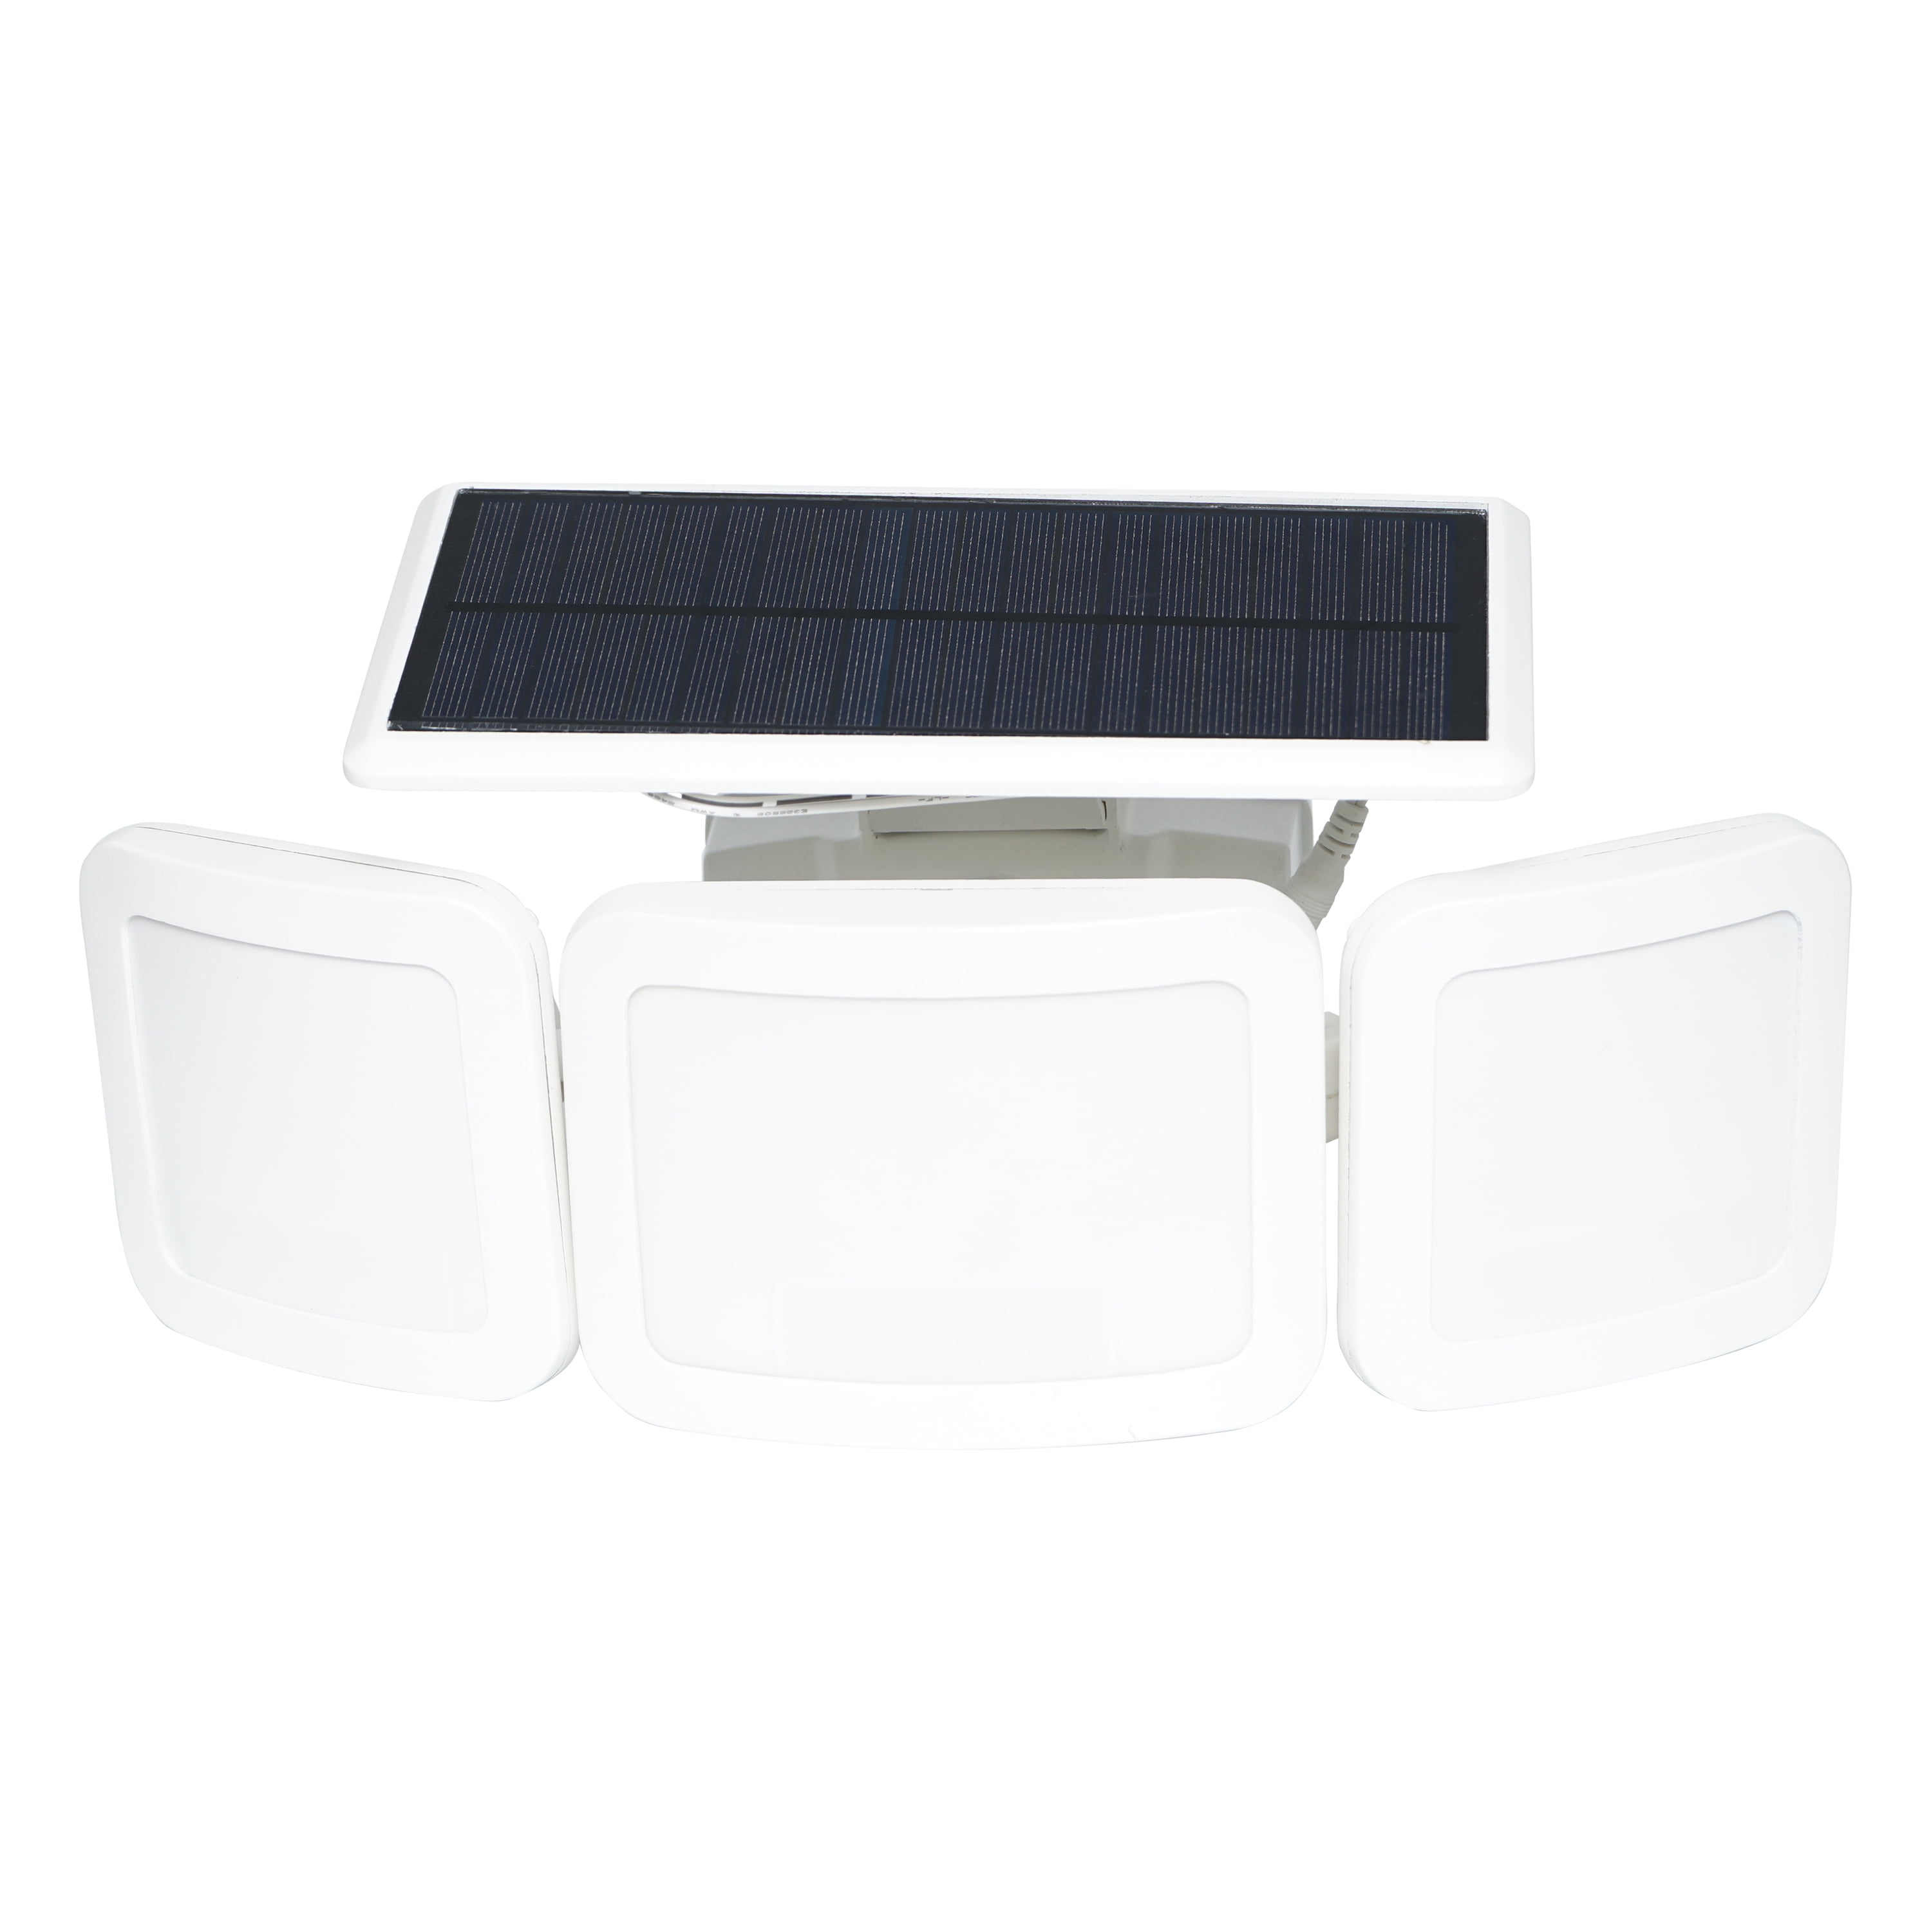 Westinghouse 3000 Lumen LED Triple Head Solar Security Light, 55-Watt Equivalent and Motion Activated